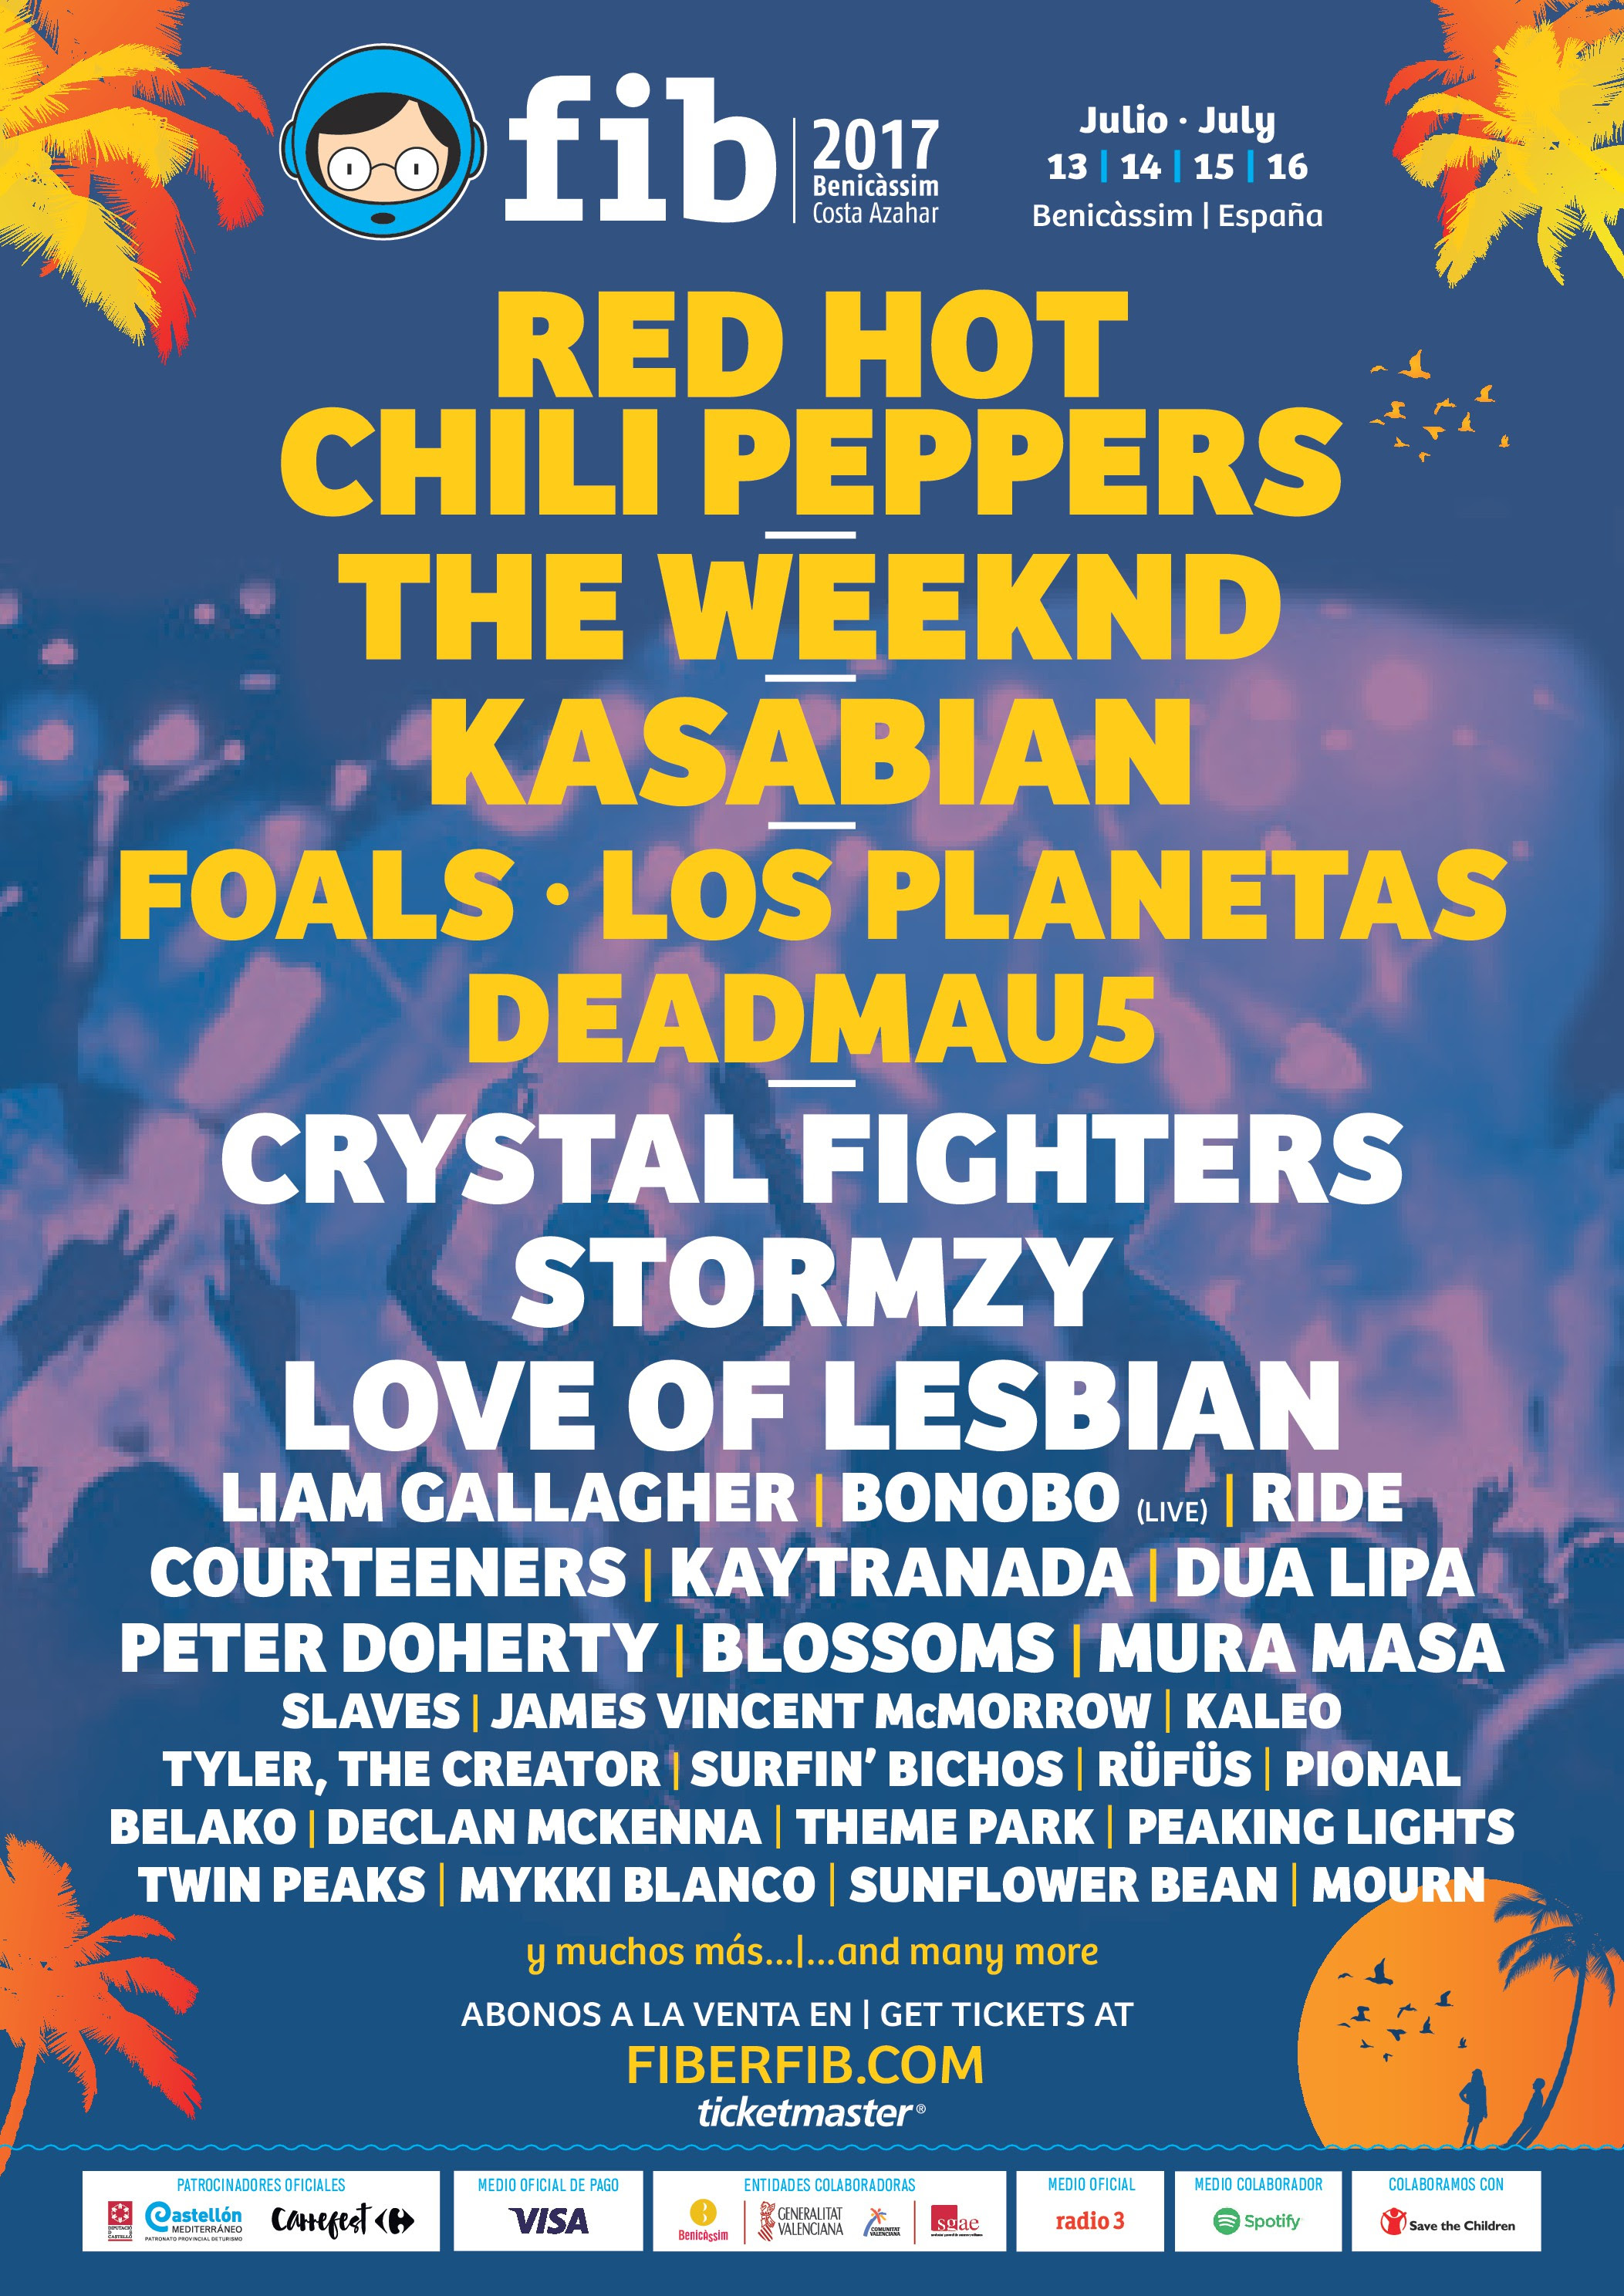 Next Wave Of Acts Announced For FIB Benicàssim 2017